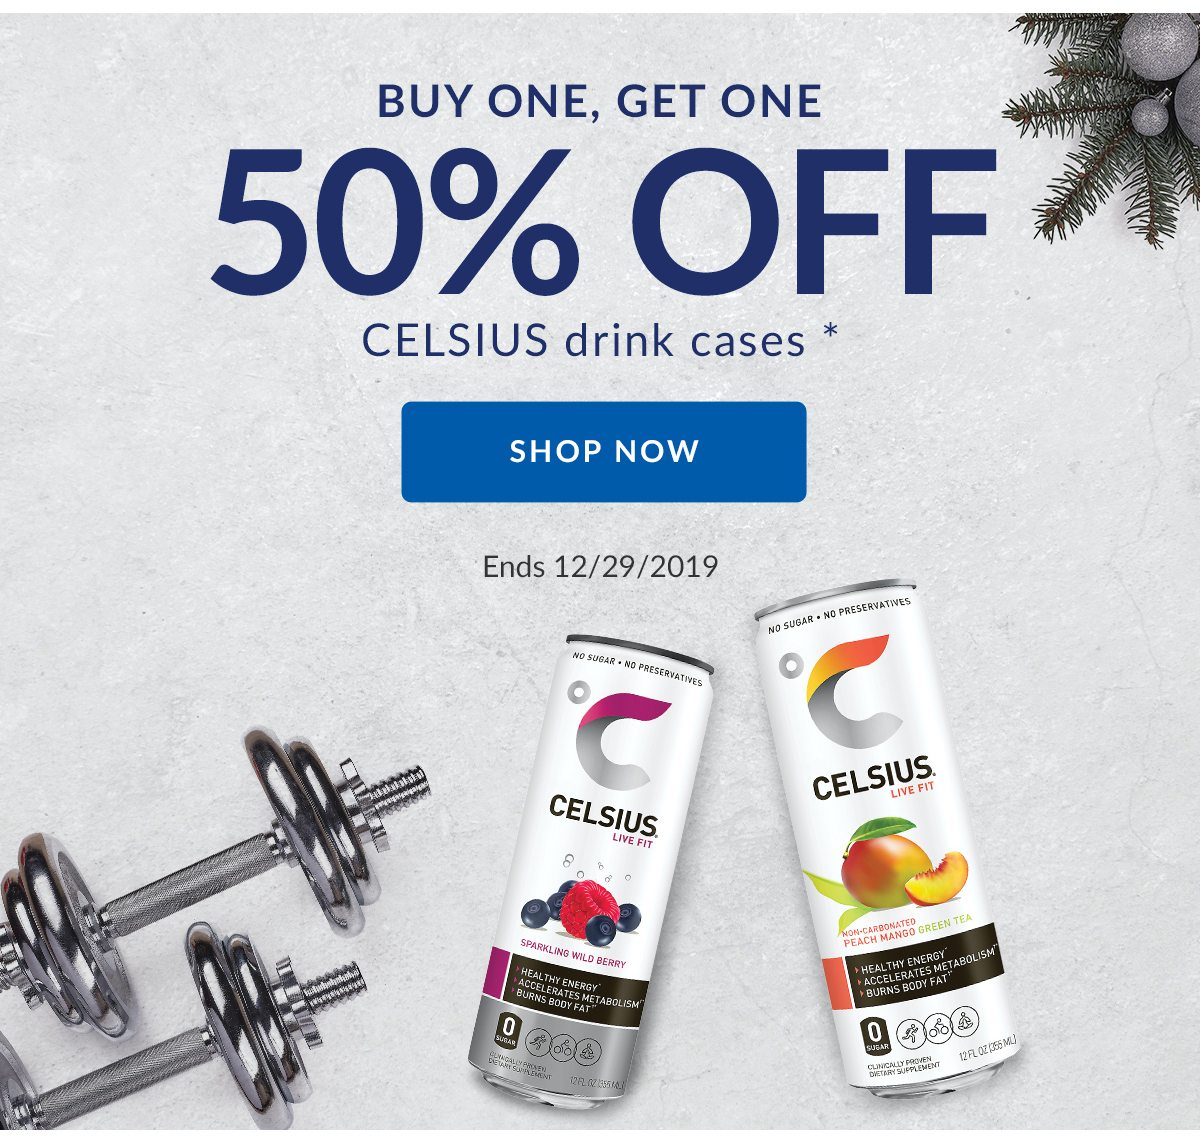 Buy one, get one 50% off celsius drink cases